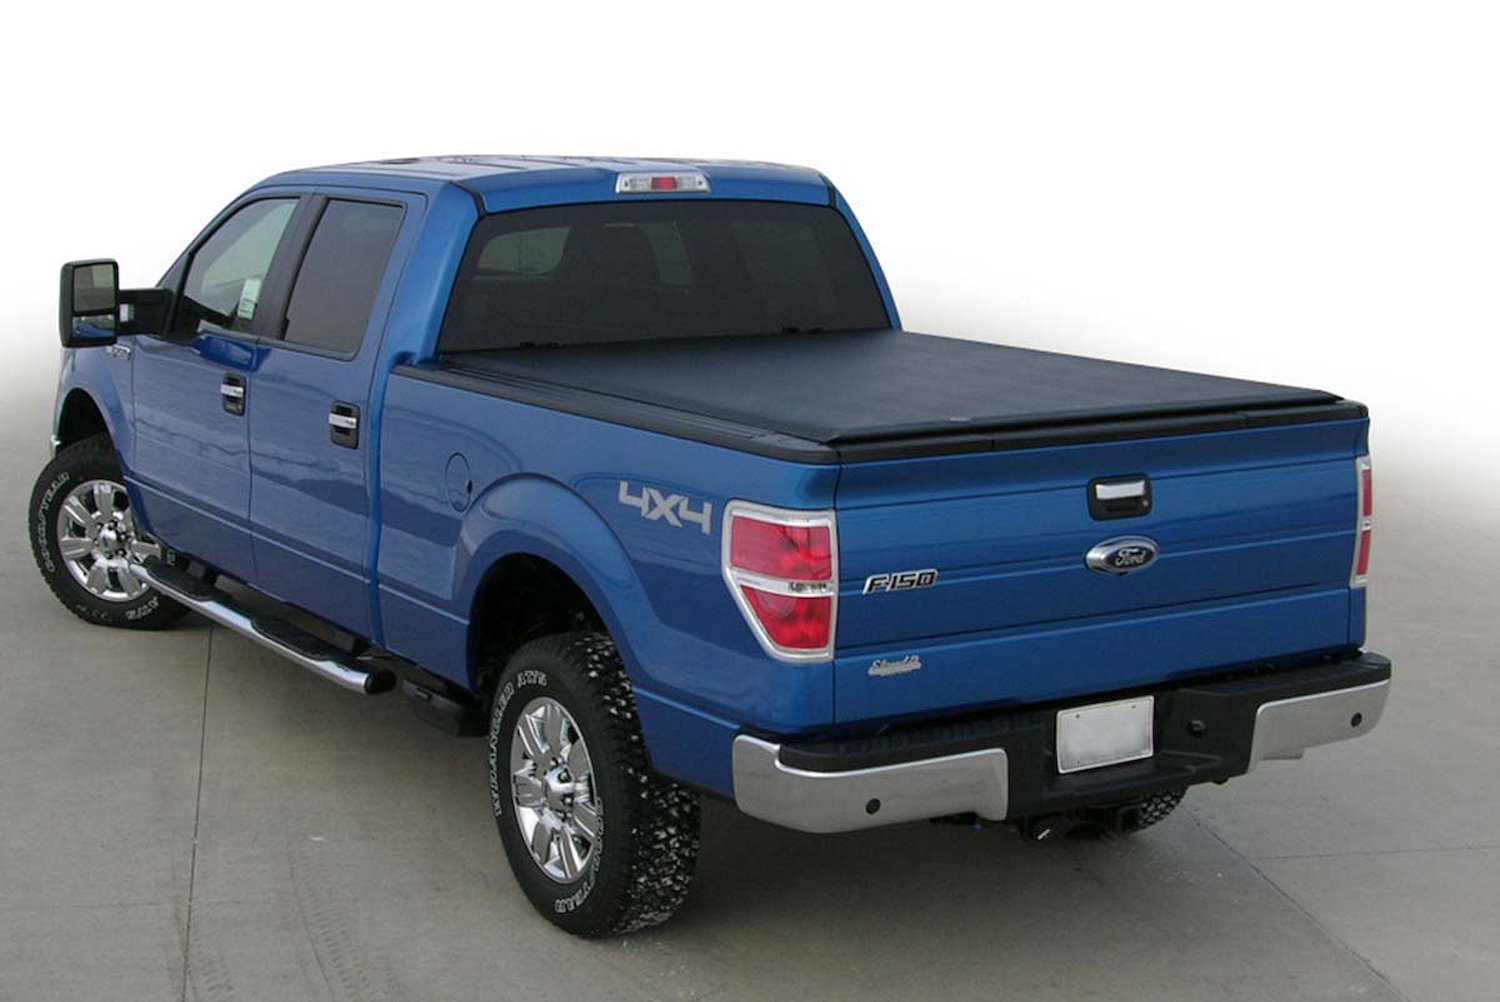 LORADO Roll-Up Tonneau Cover, Fits Select Ford Ranger,